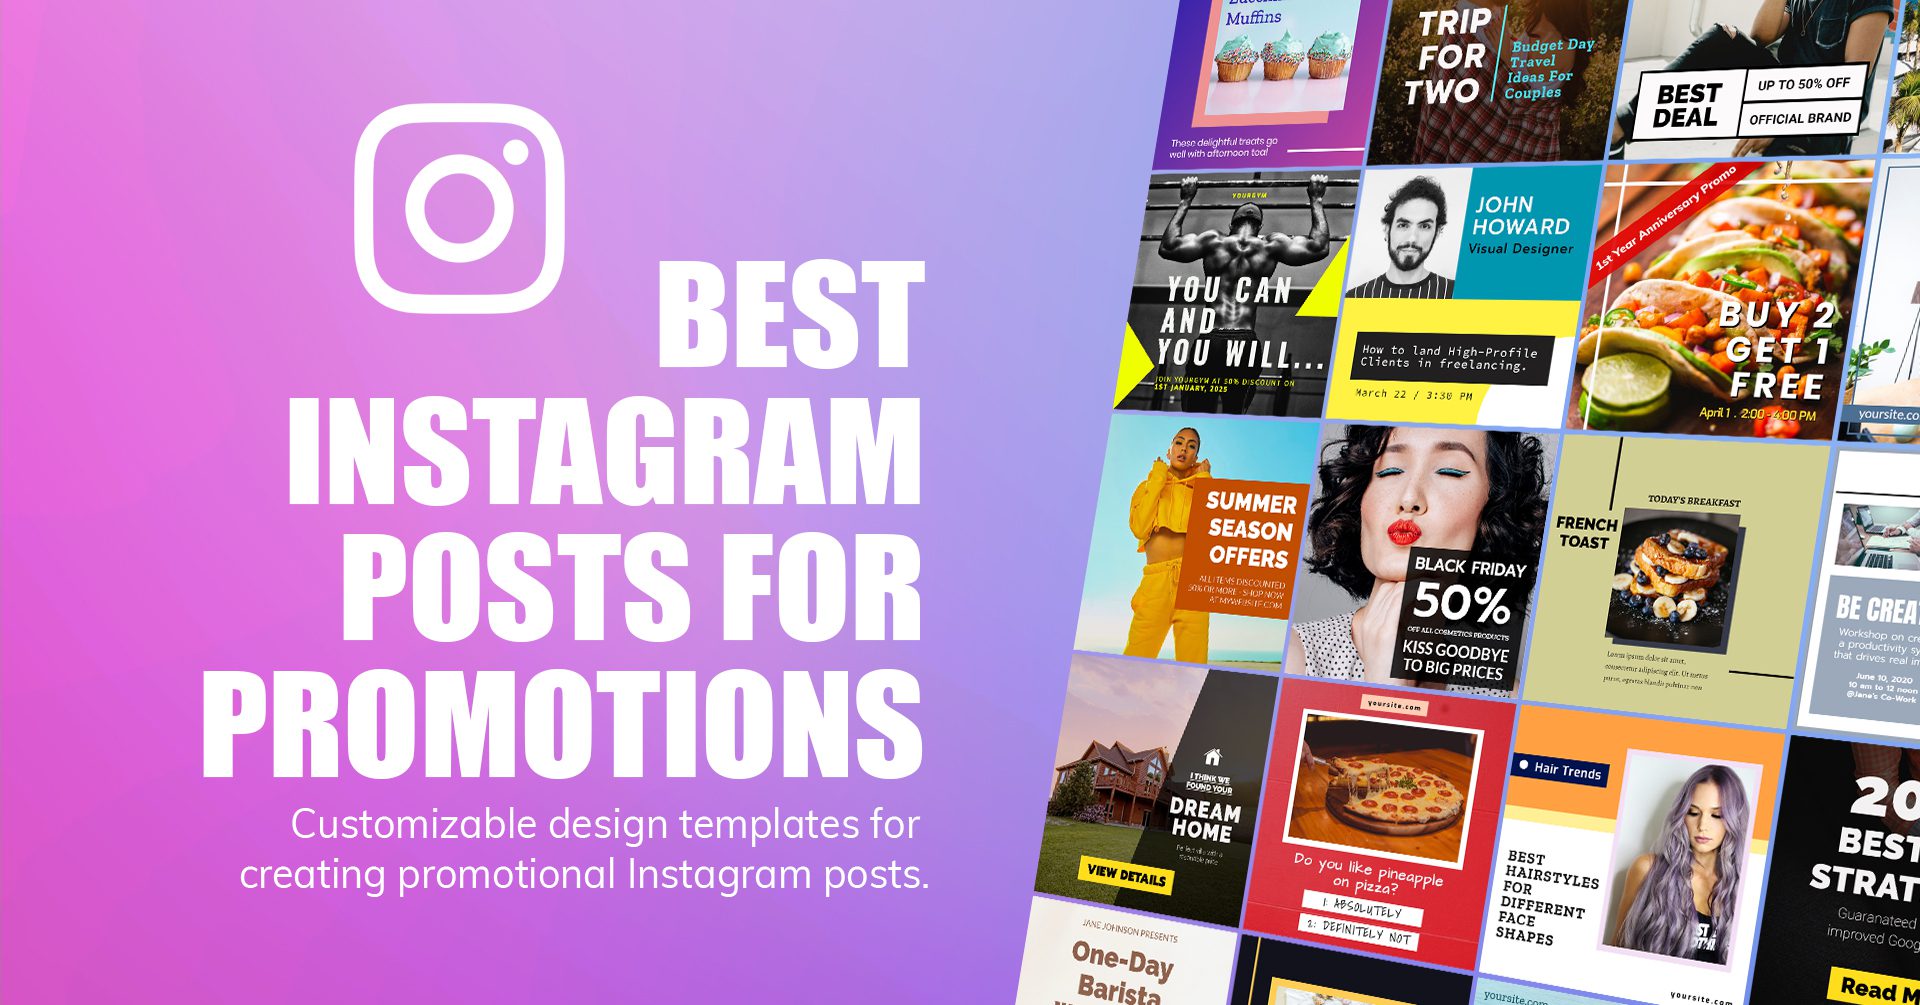 Best 37 Instagram Ad Designs for Promotional Posts | Mediamodifier